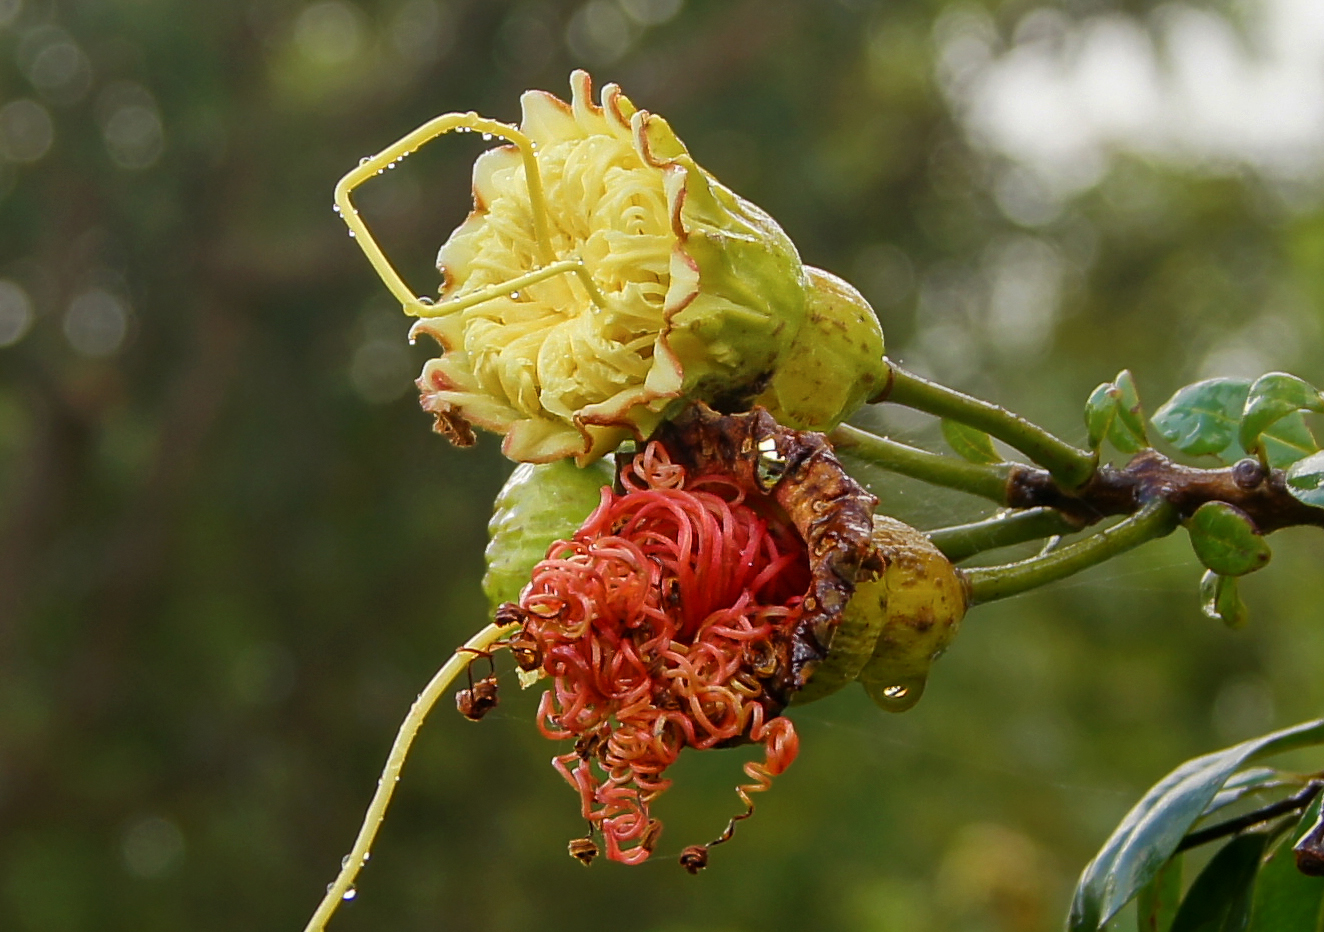 A Lafoensia punicifolia branch with yellow flower with long yellow filaments, green flower buds and two dying flowers with curly red filaments